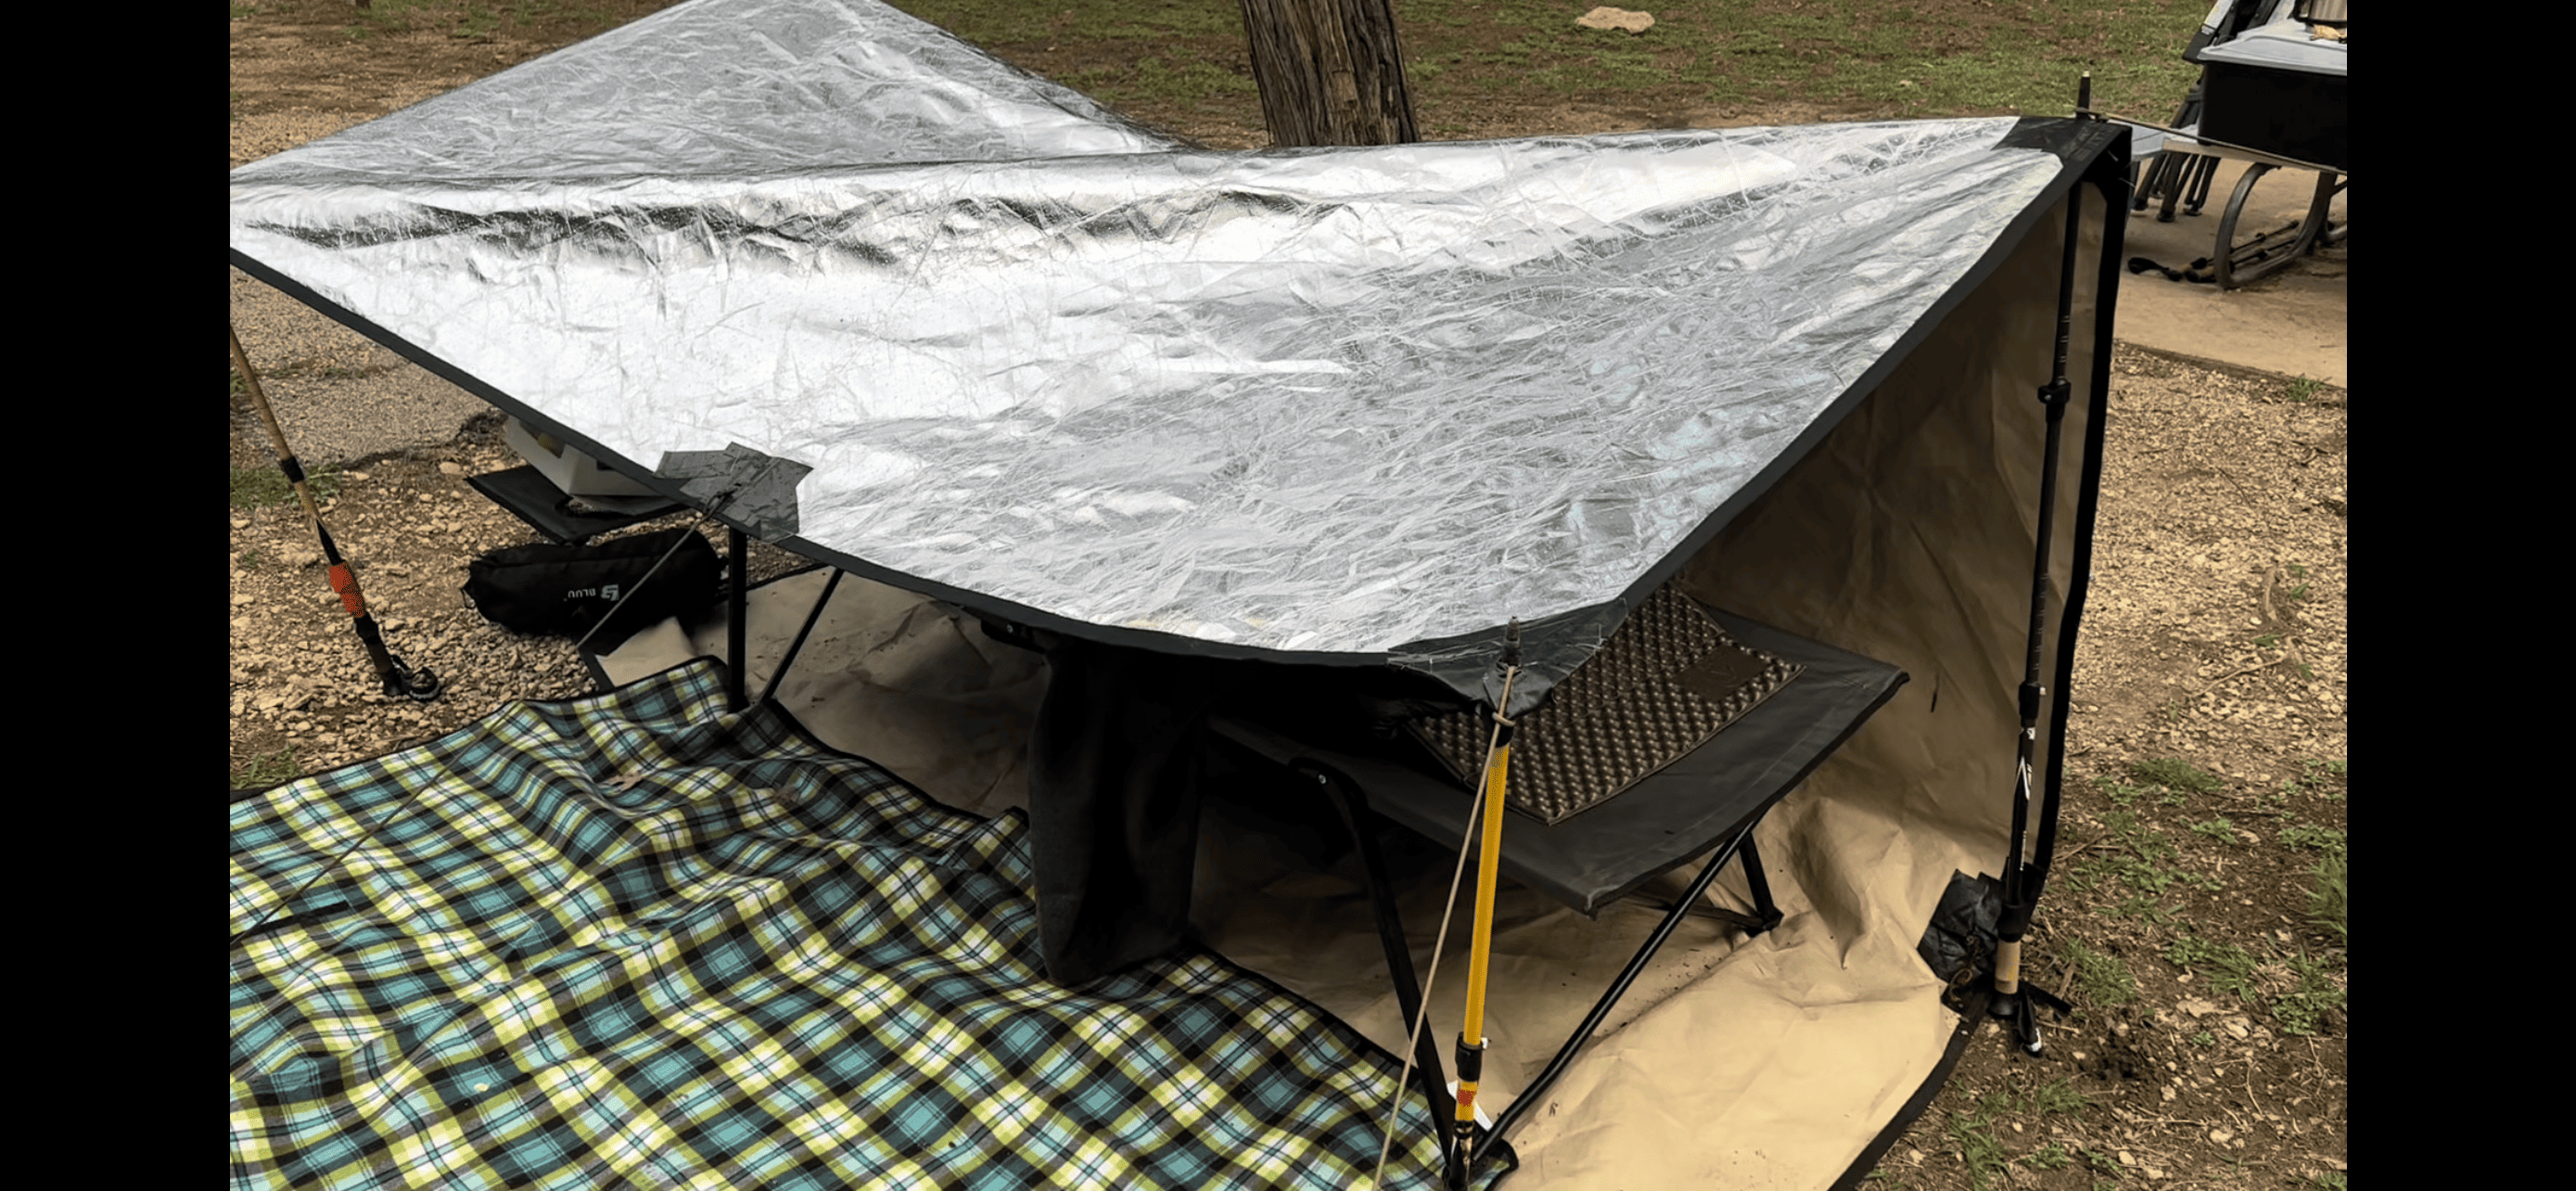 Photograph of a primitive camping cot